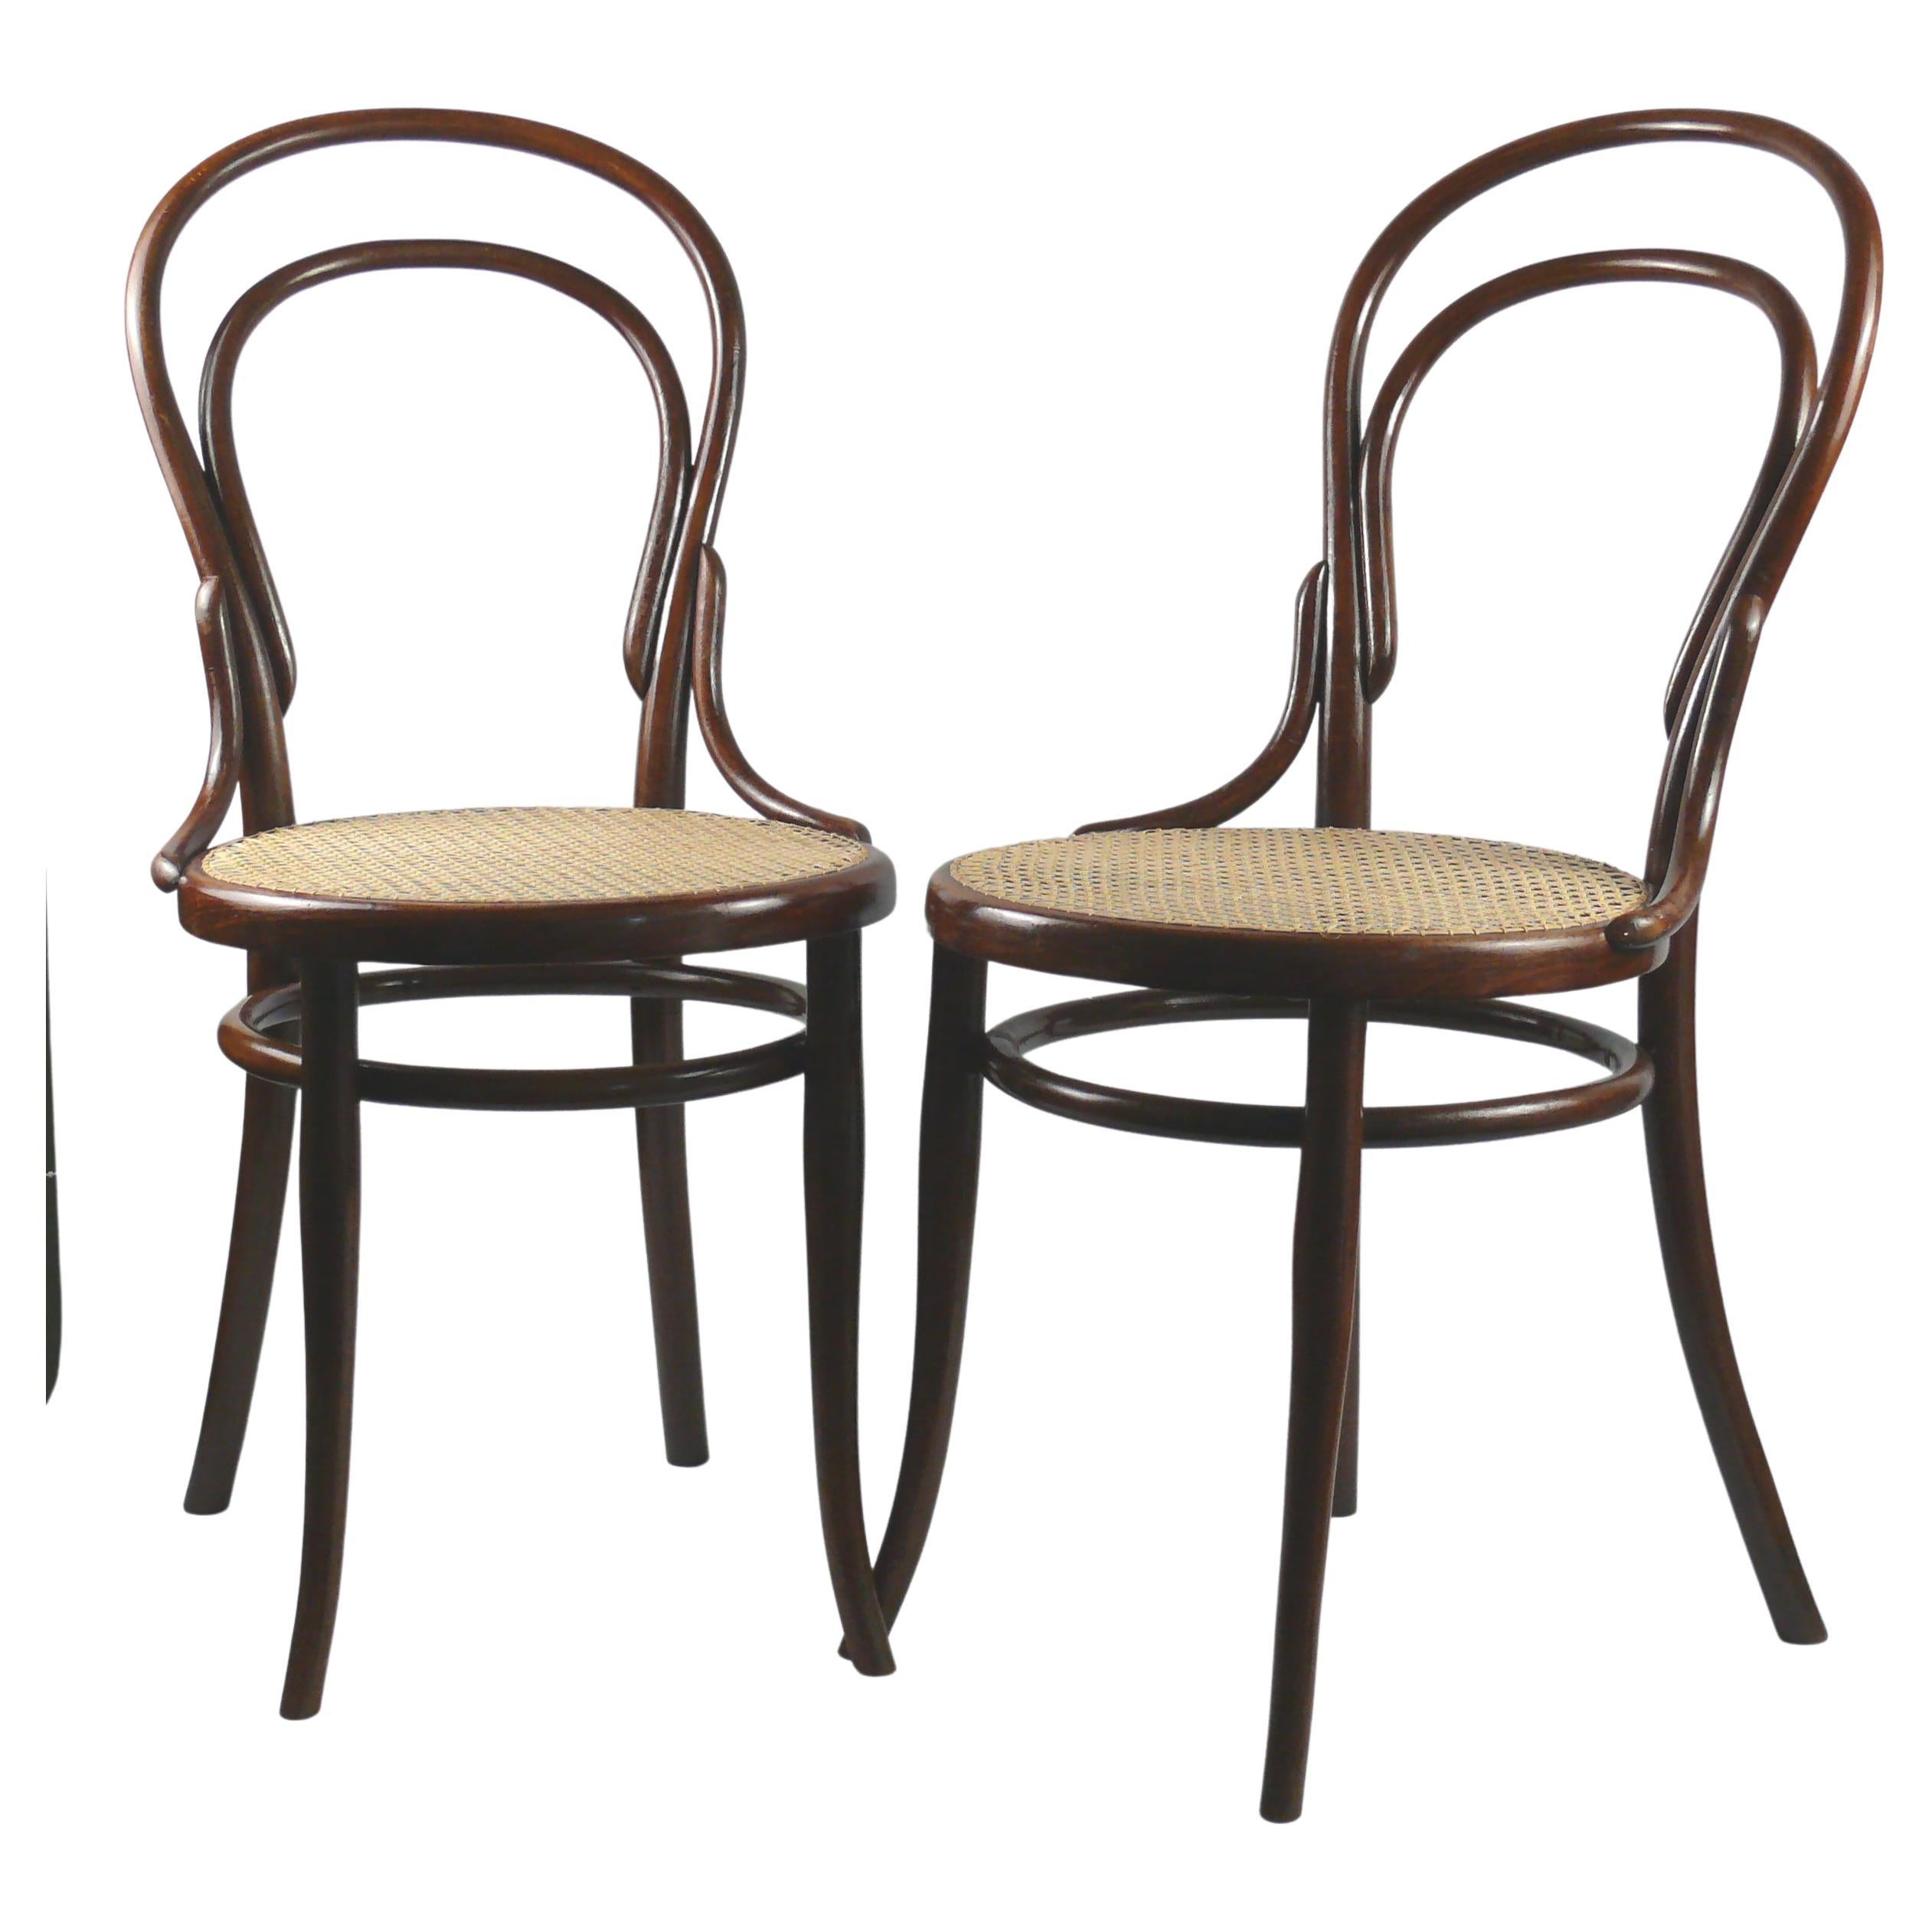 Set of 2 Original Thonet Bentwood Chairs No. 14, Late 19th